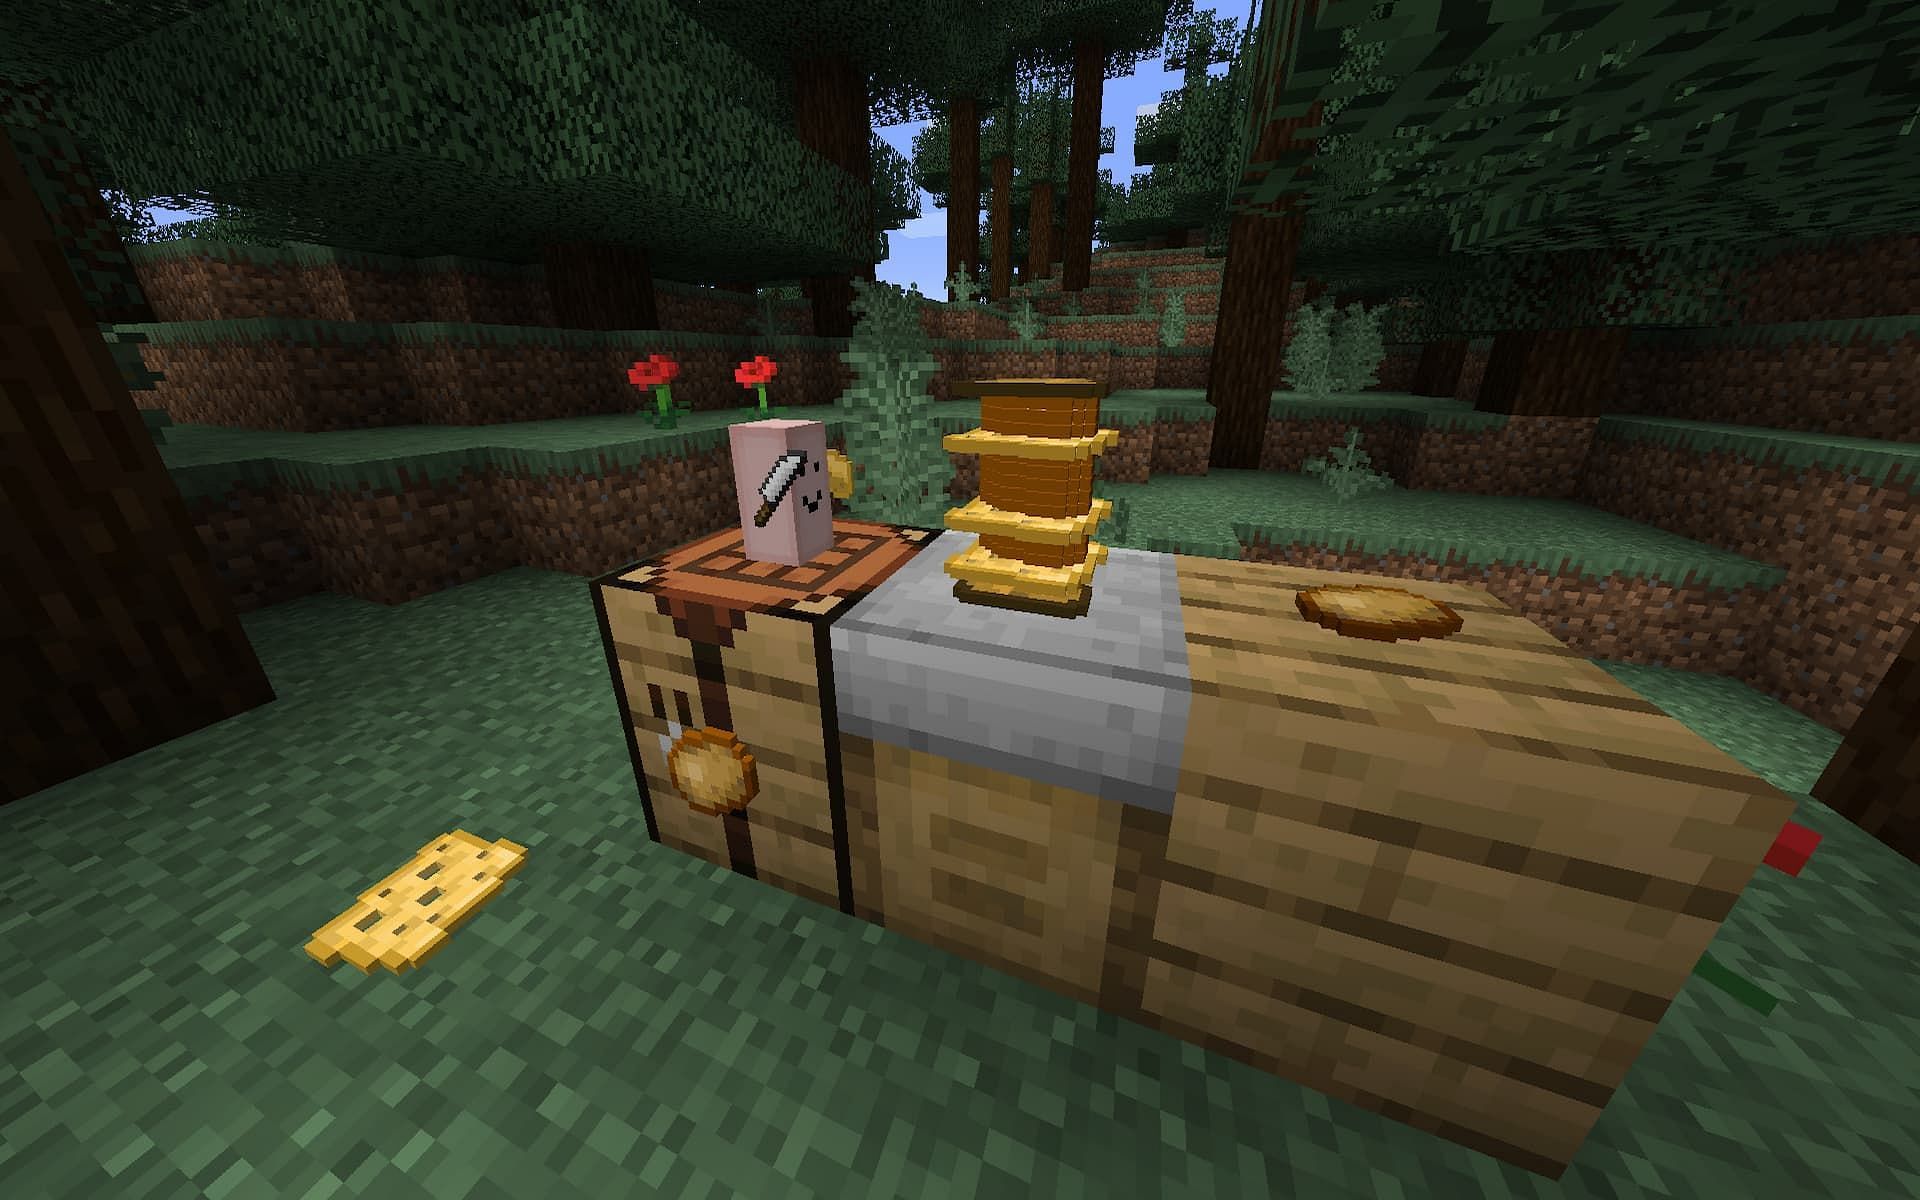 A pink rectangle holds a knife to cut through food in a strange Minecraft Fabric mod